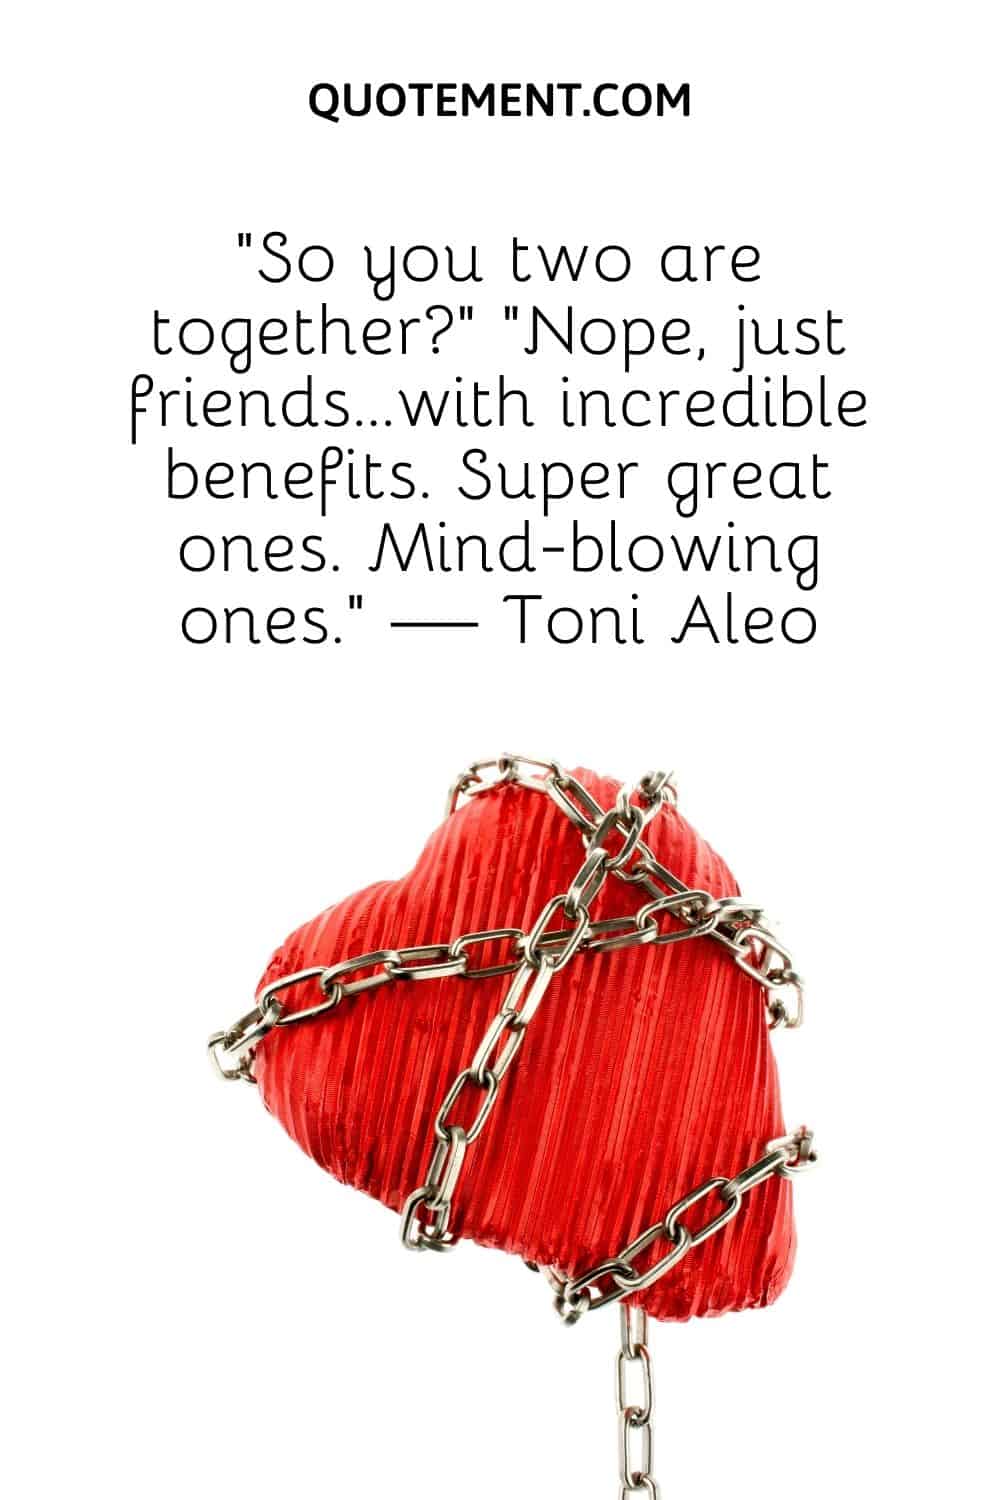 “So you two are together” “Nope, just friends…with incredible benefits. Super great ones. Mind-blowing ones.” — Toni Aleo